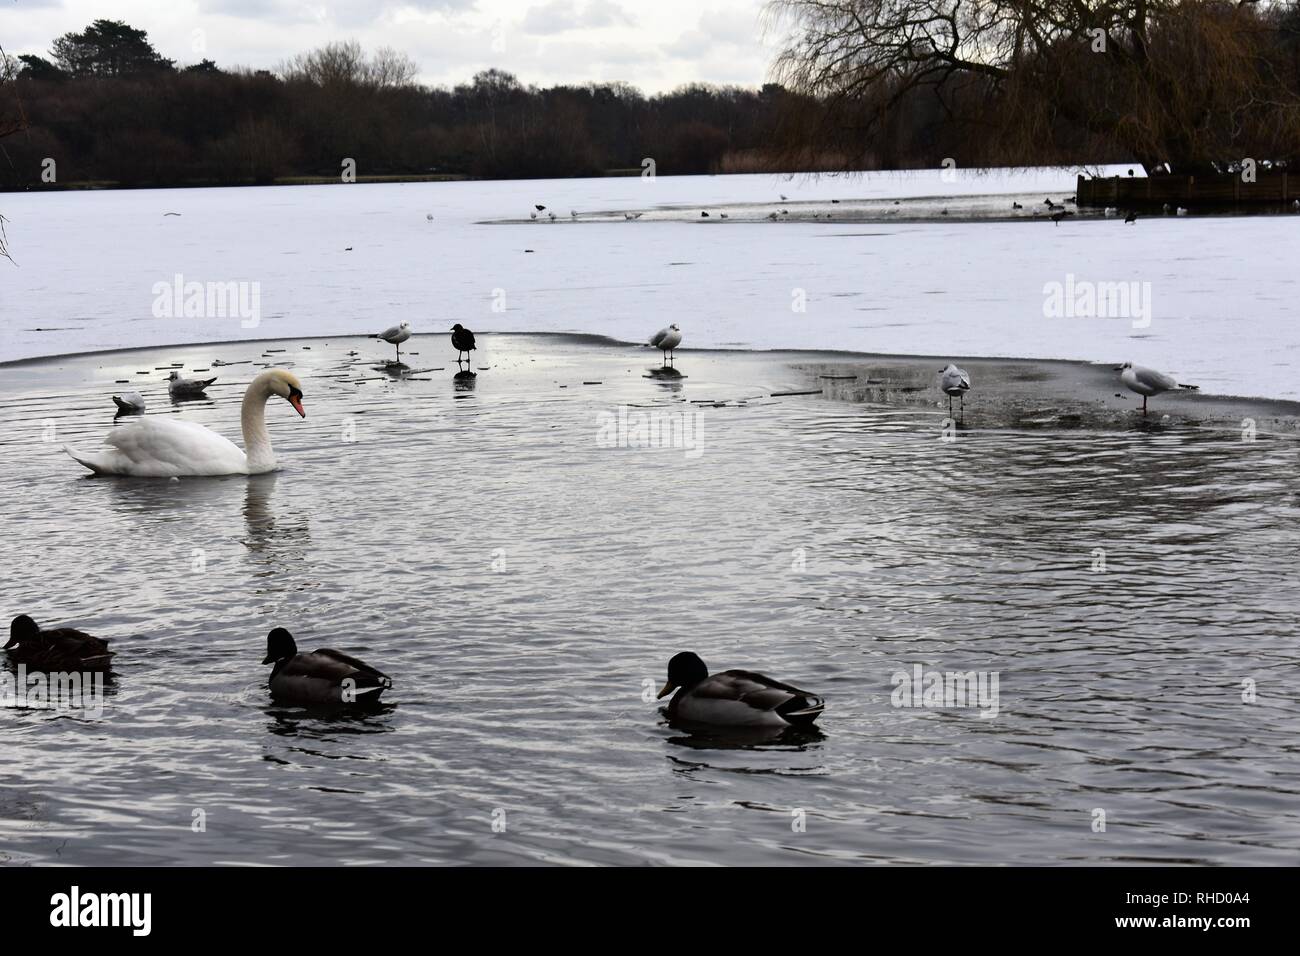 Ducks and Swans on a Partially Frozen Petersfield Lake (a.k.a Heath Pond), Petersfield, Hampshire, England. Stock Photo